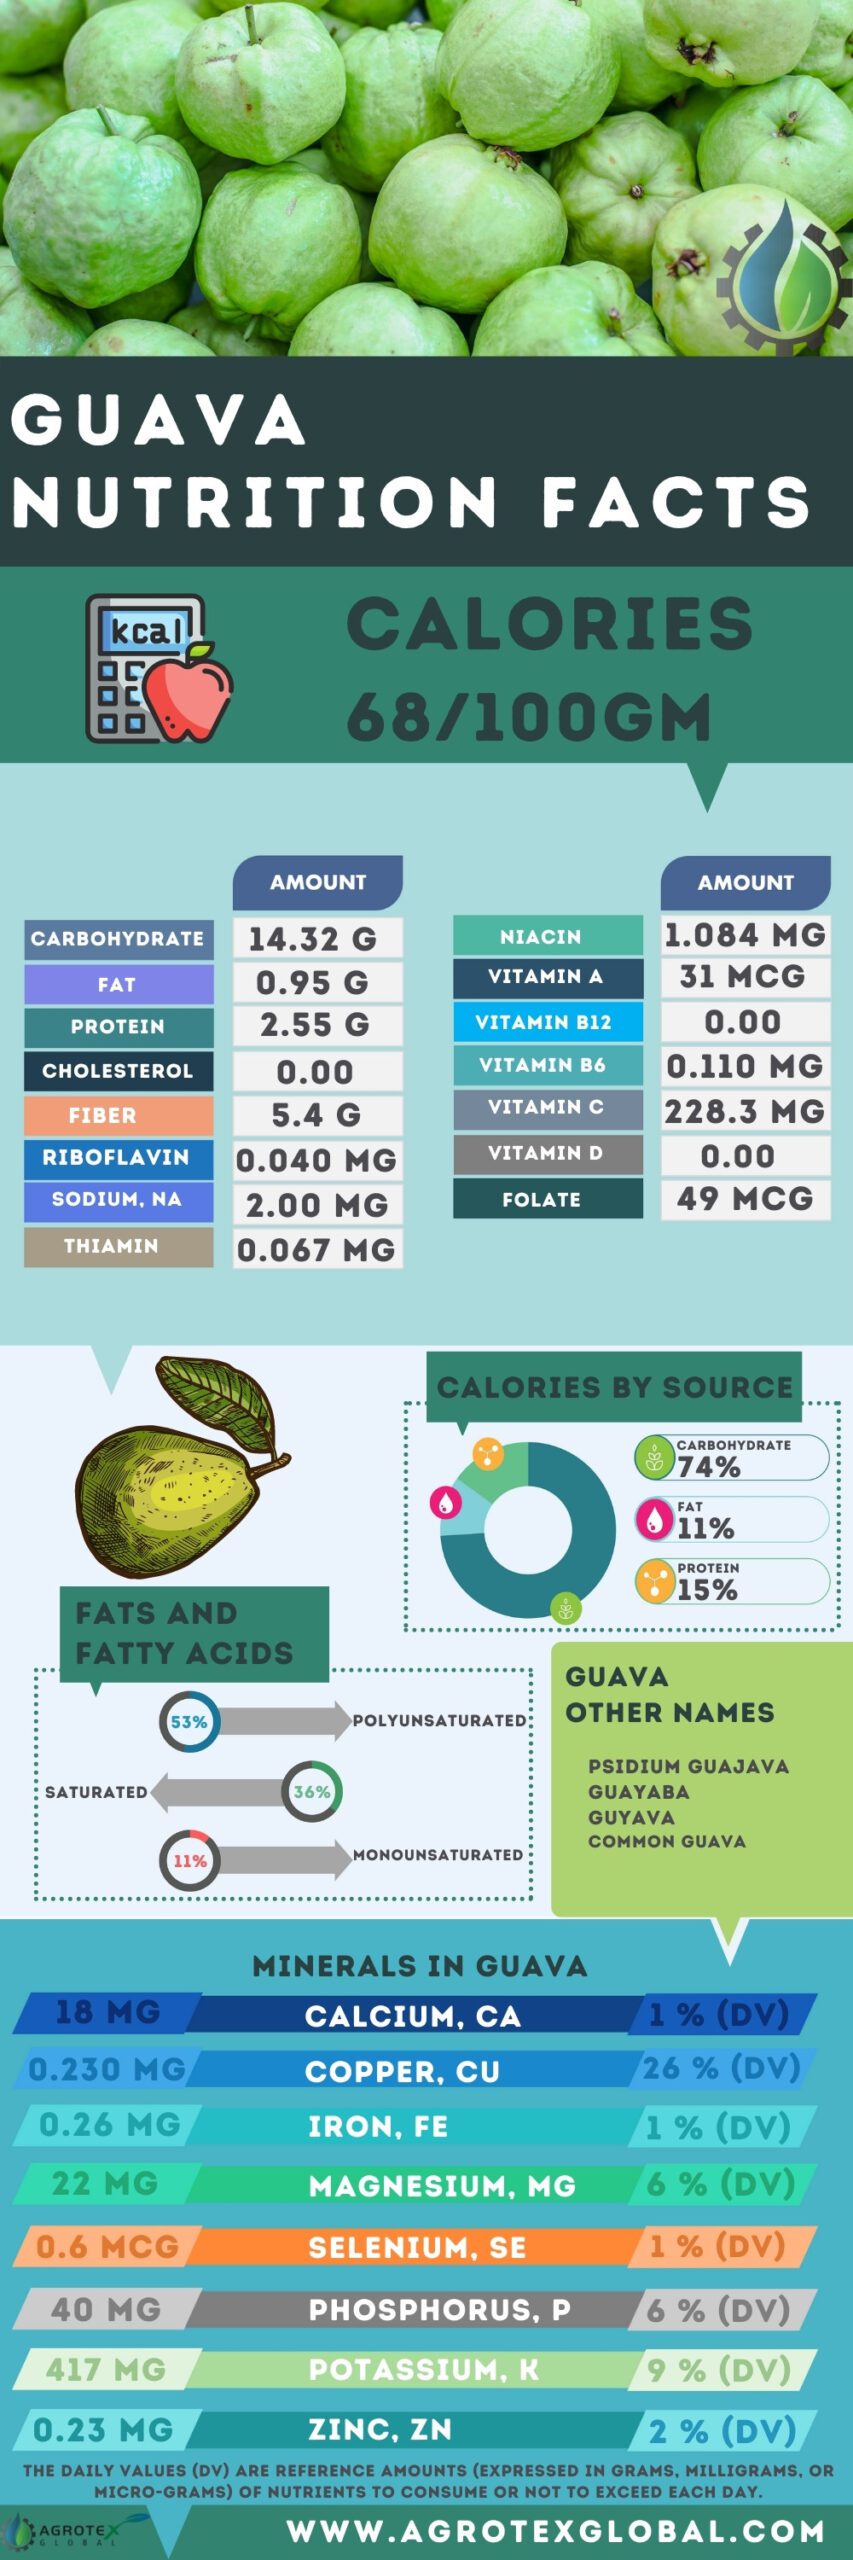 Guava NUTRITION FACTS calorie chart infographic